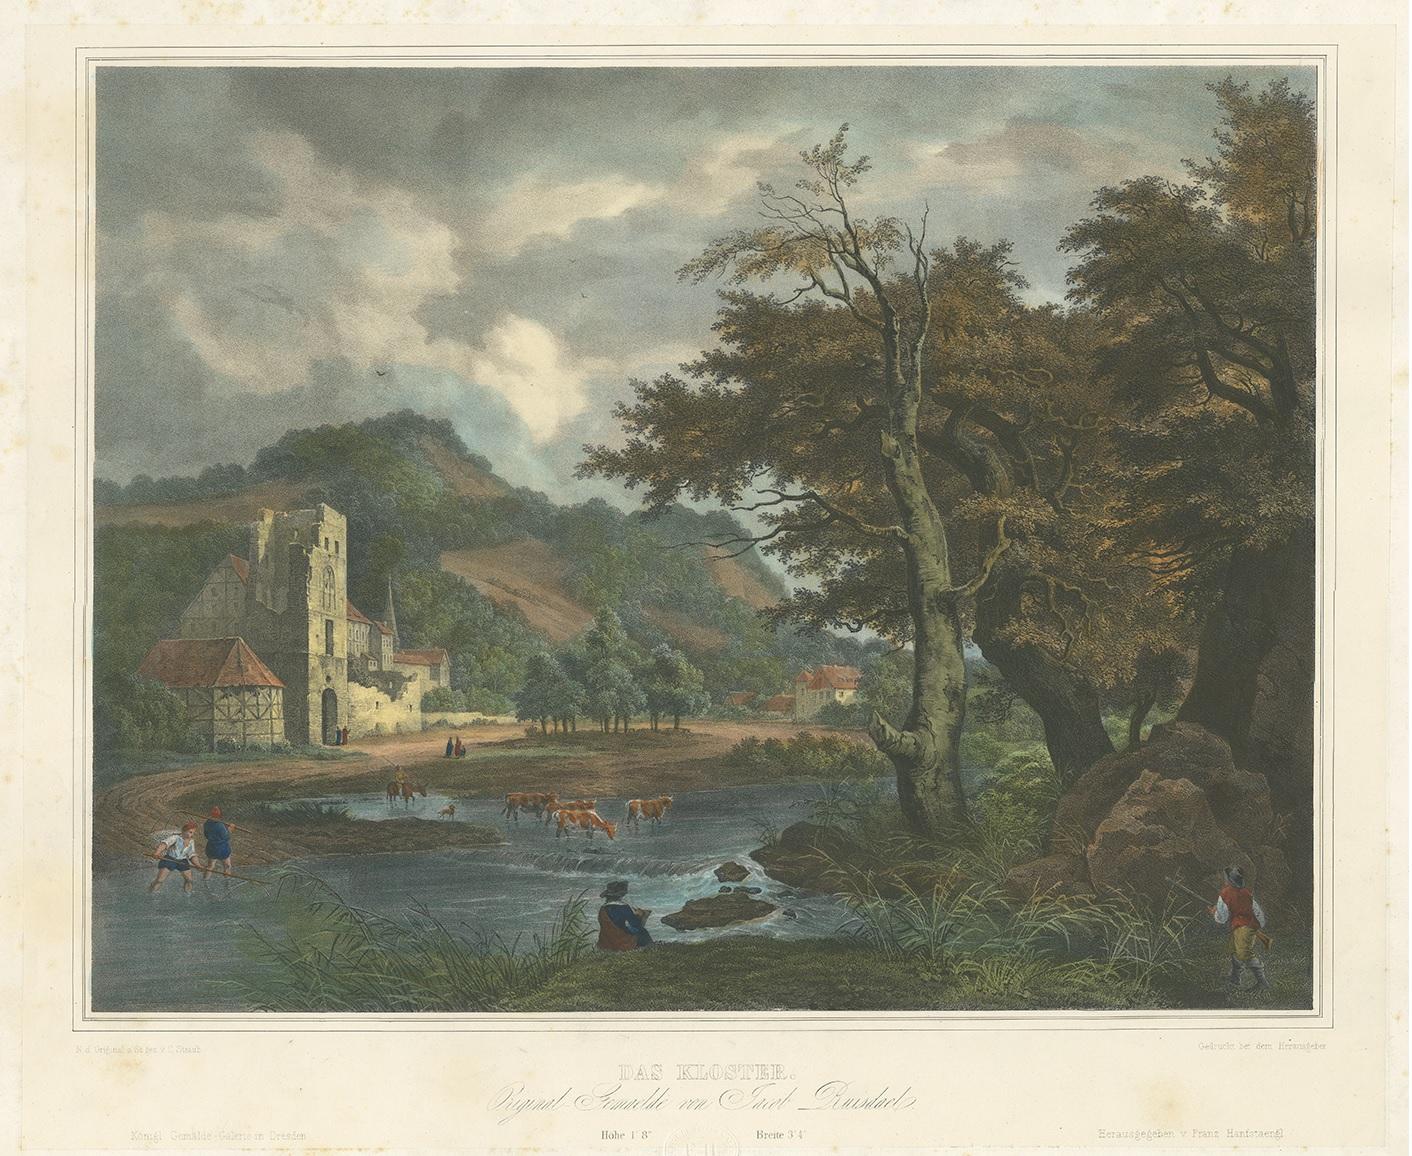 Antique print titled 'Das Kloster'. Lithograph, on chine collé, of a landscape with a shepherd and his cattle crossing a river. Made after C. Straub. Published circa 1840.